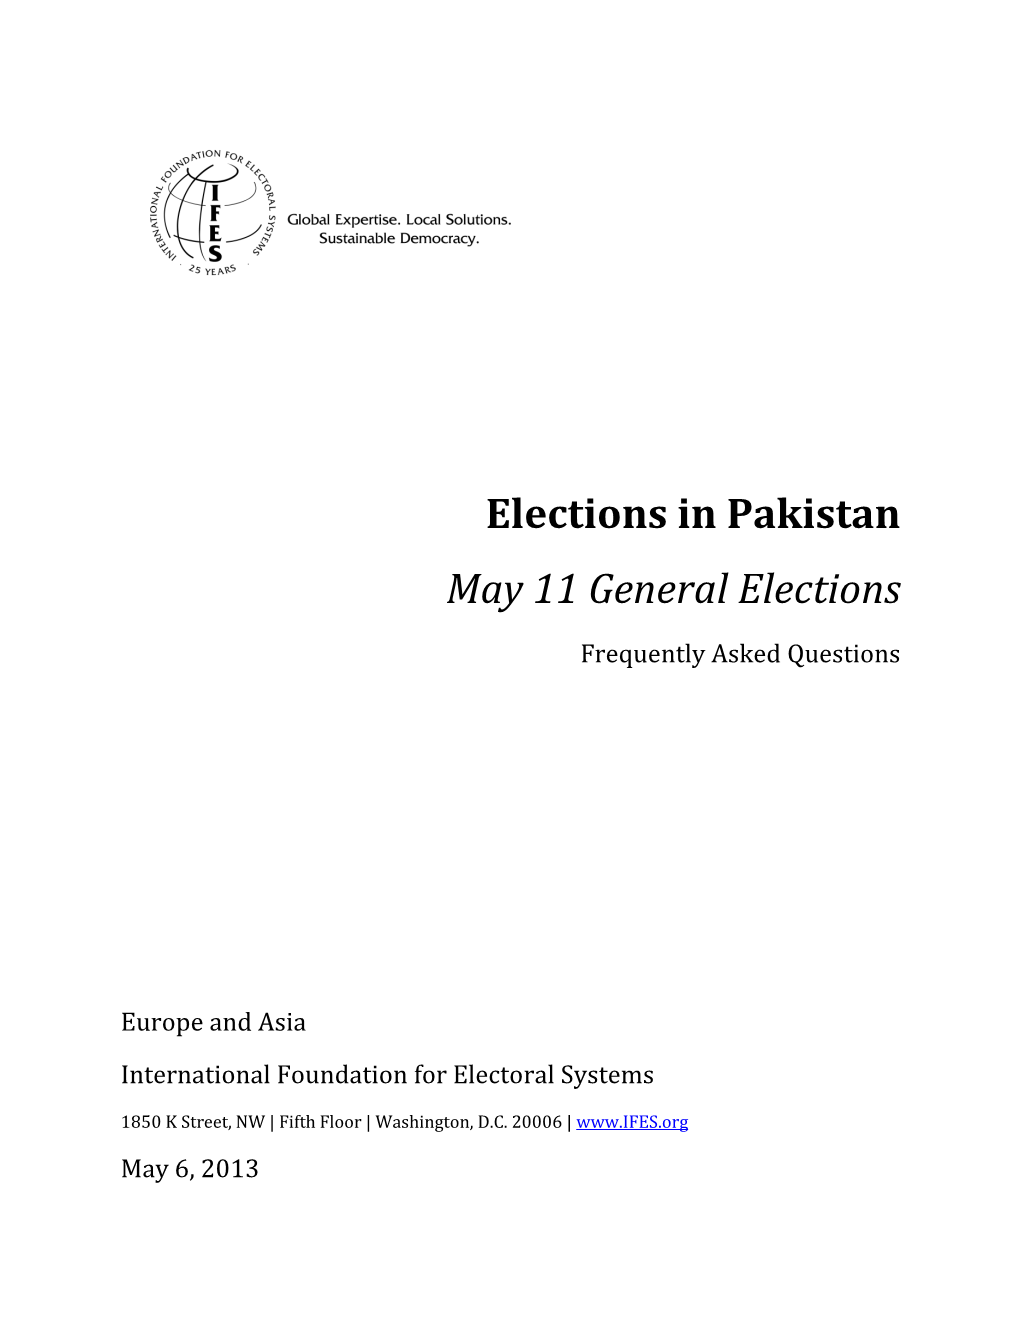 Elections in Pakistan May 11 General Elections